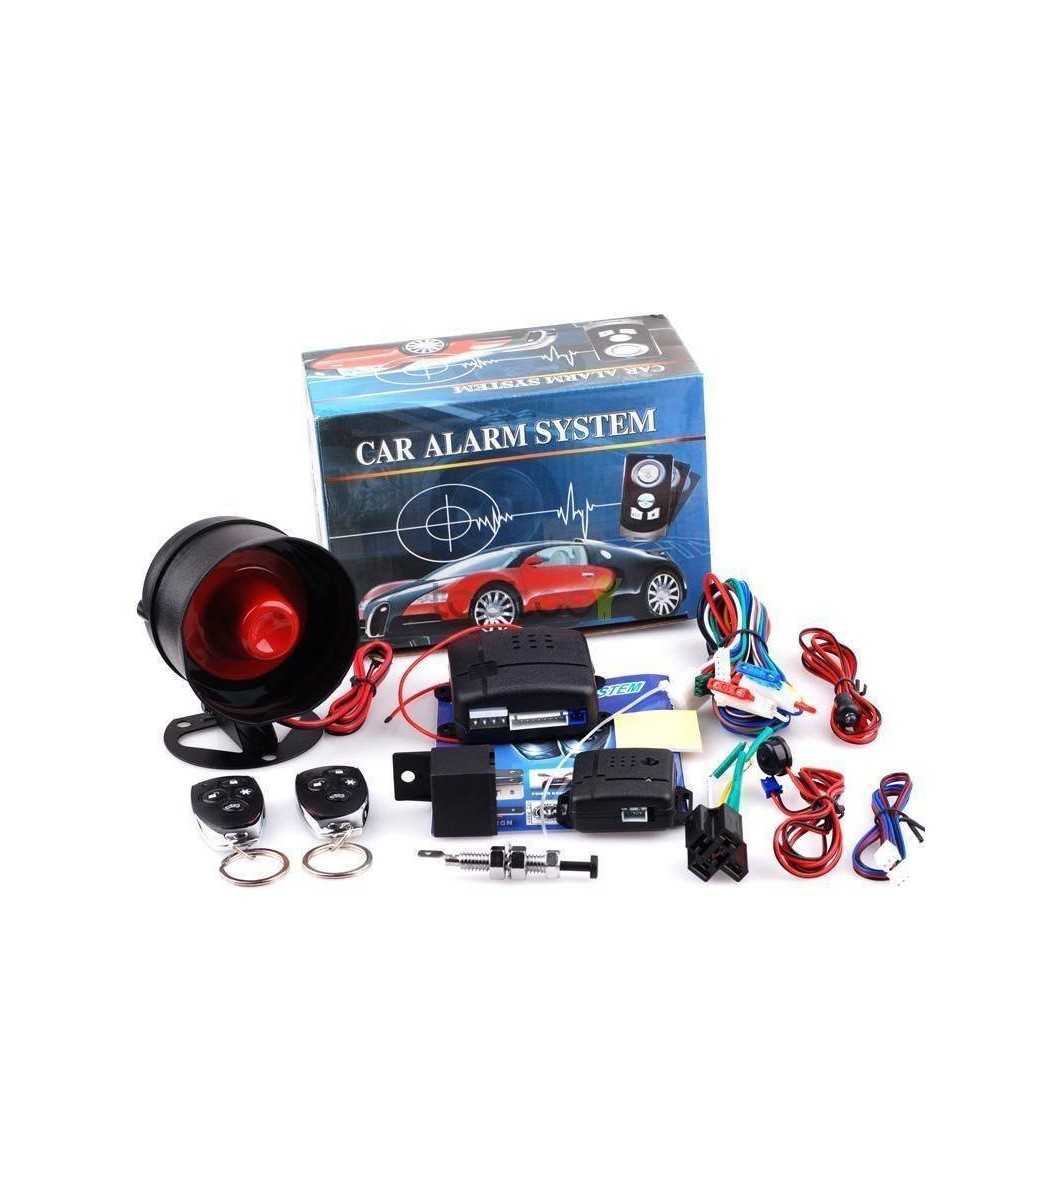 Universal Car Vehicle Security System Burglar Alarm Protection Anti-theft  System 2 Remote Car Accessories